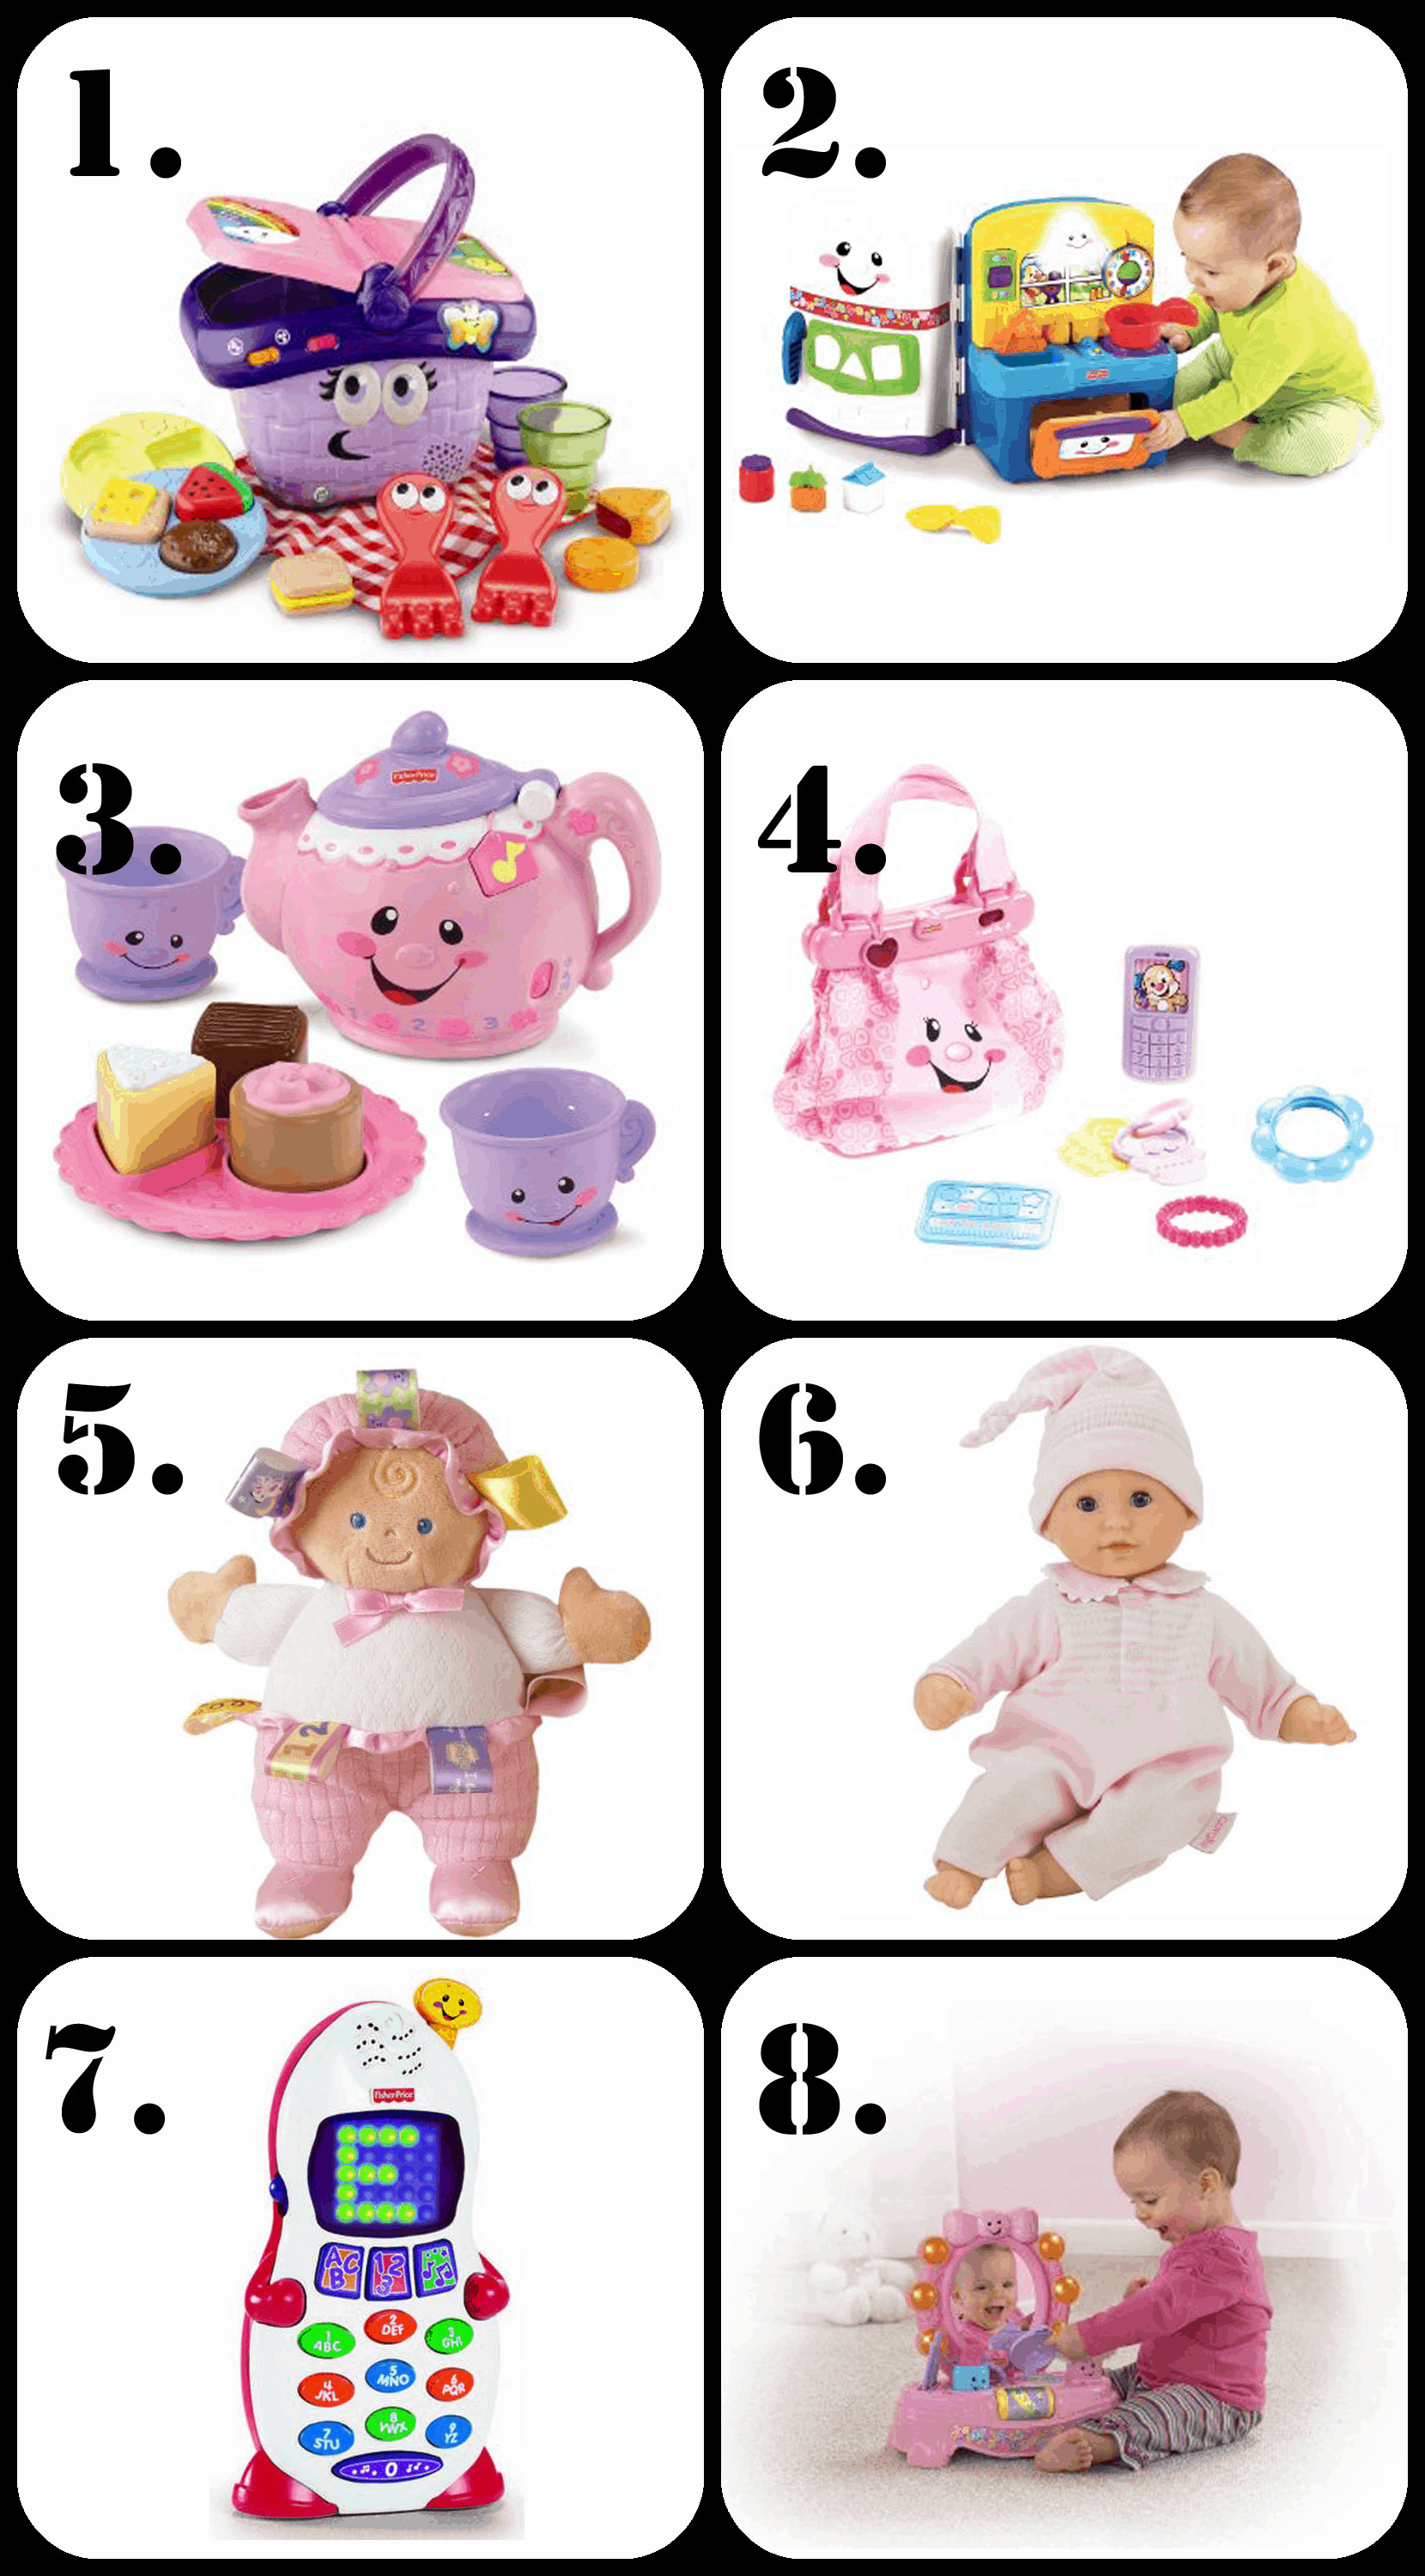 Christmas Gift Ideas For 1 Year Old
 The Ultimate List of Gift Ideas for a 1 Year Old Girl